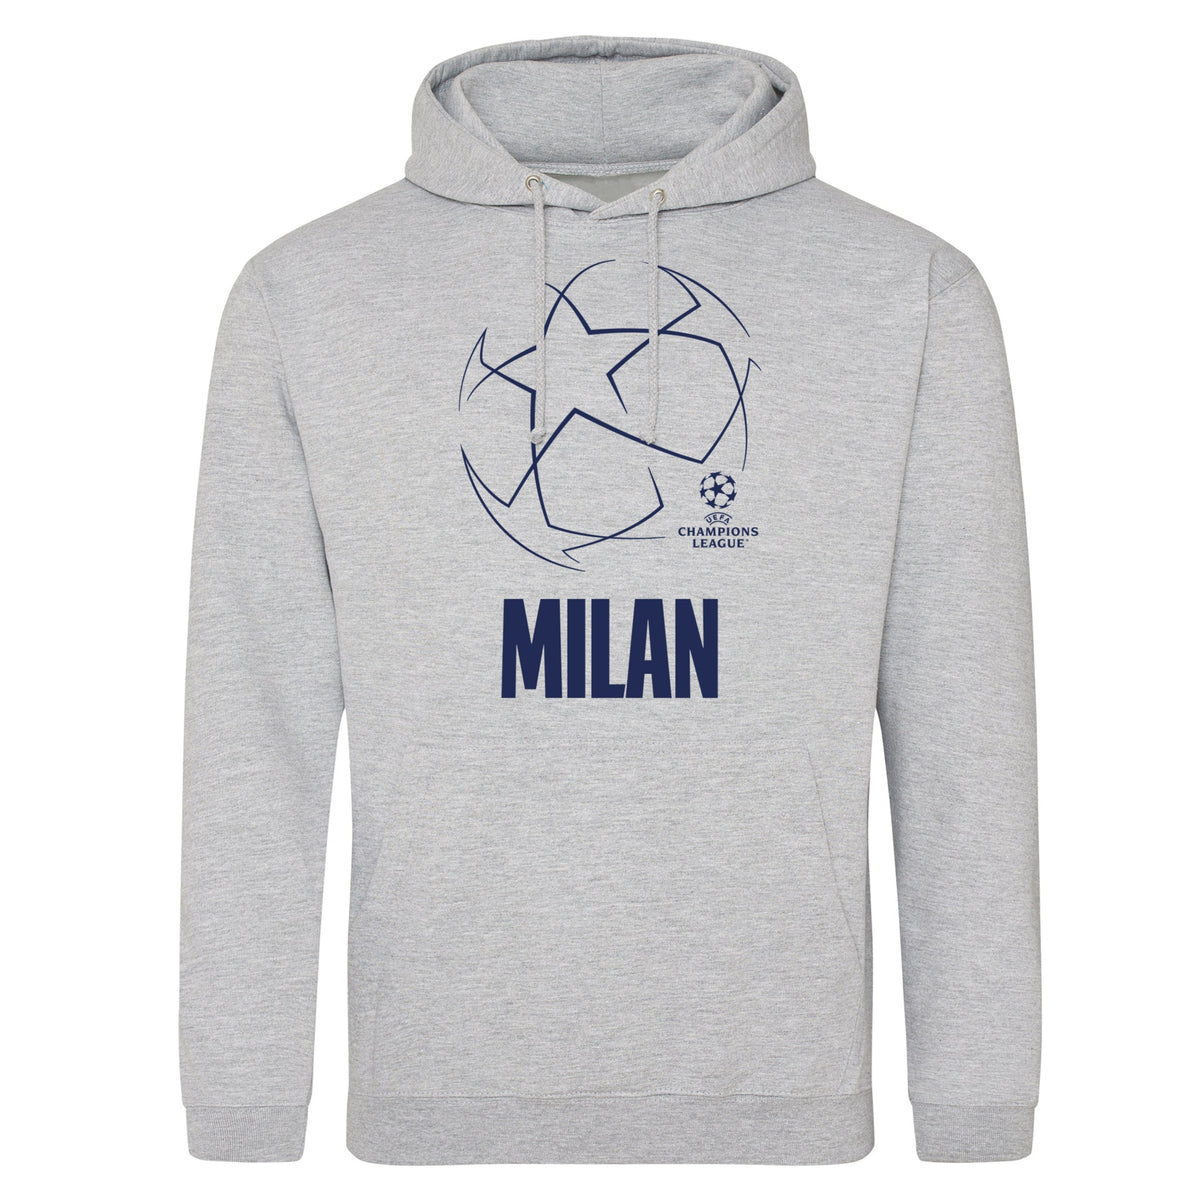 Champions League Starball Milan City Hoodie Grey